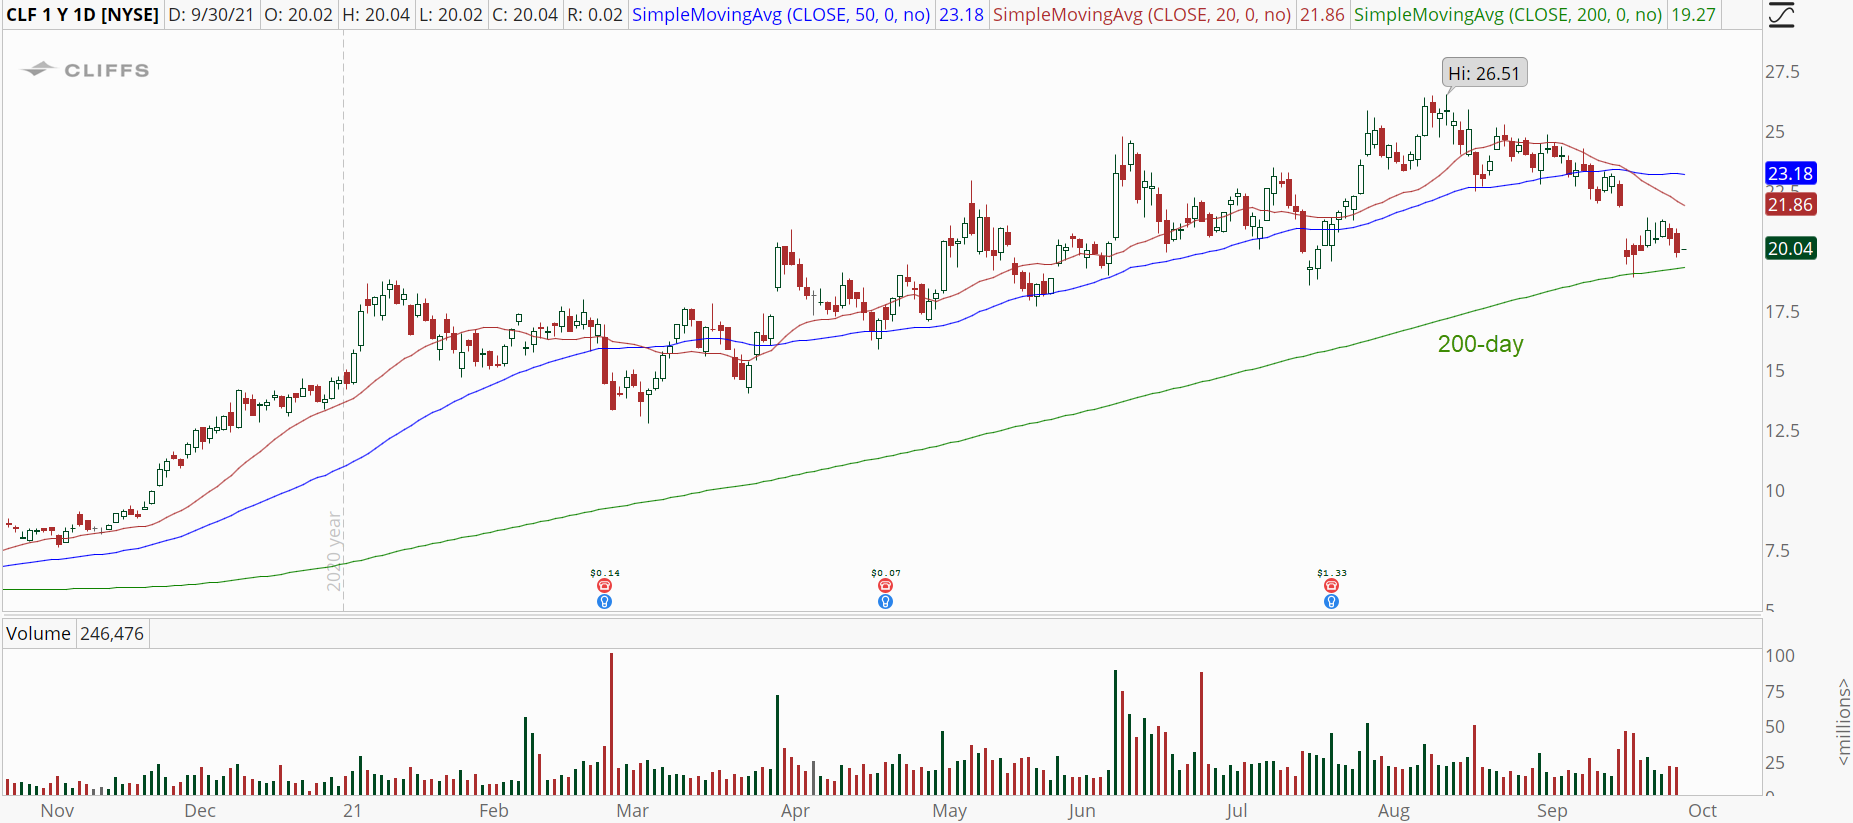 Cleveland-Cliffs (CLF) daily chart with downtrend.